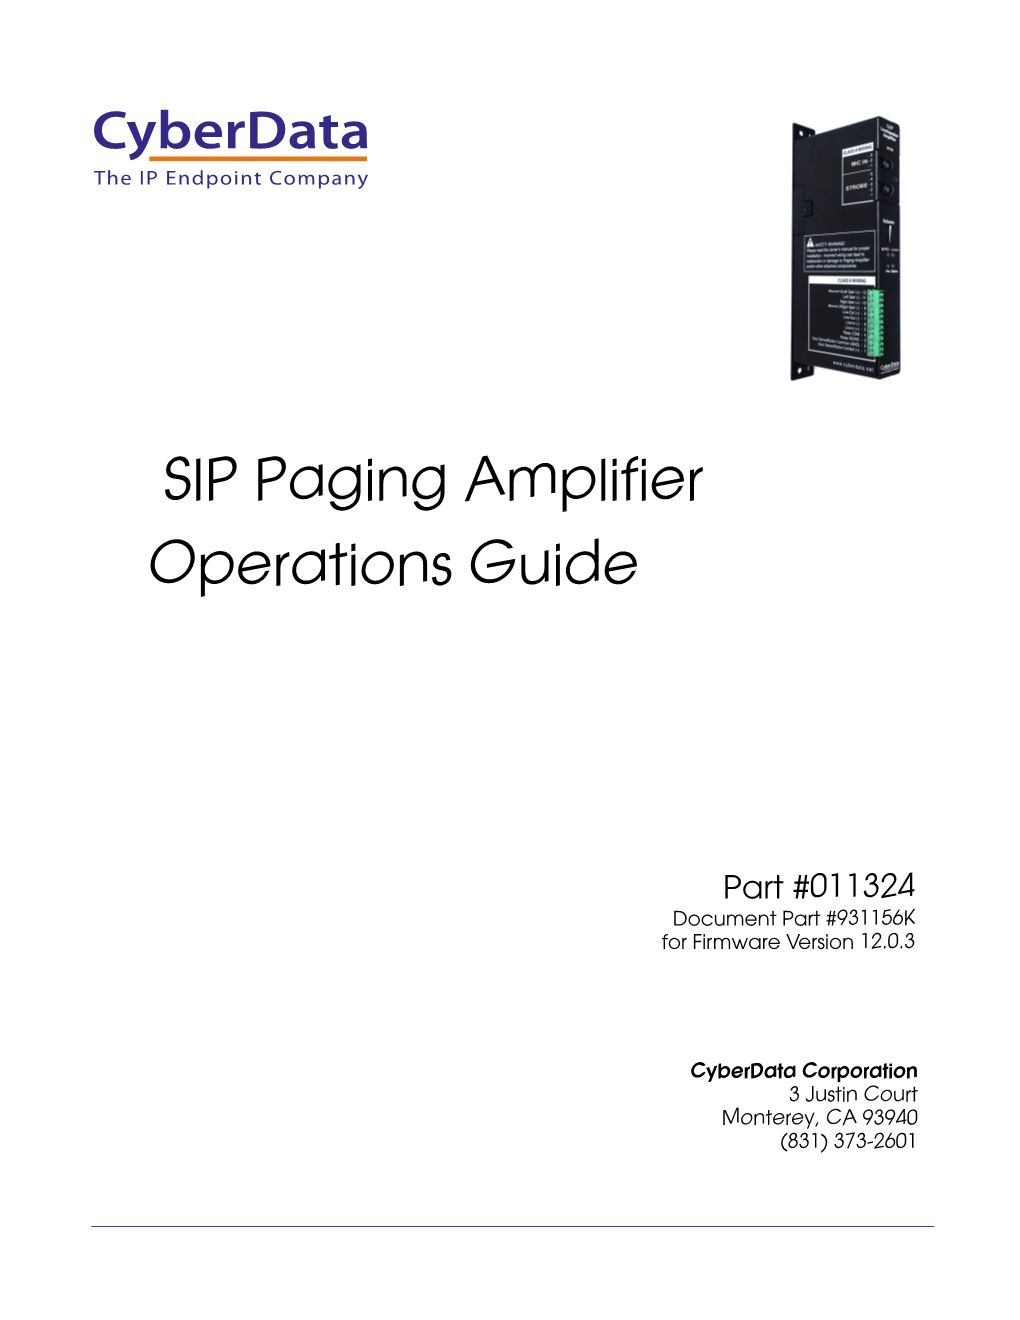 SIP Paging Amplifier Operations Guide